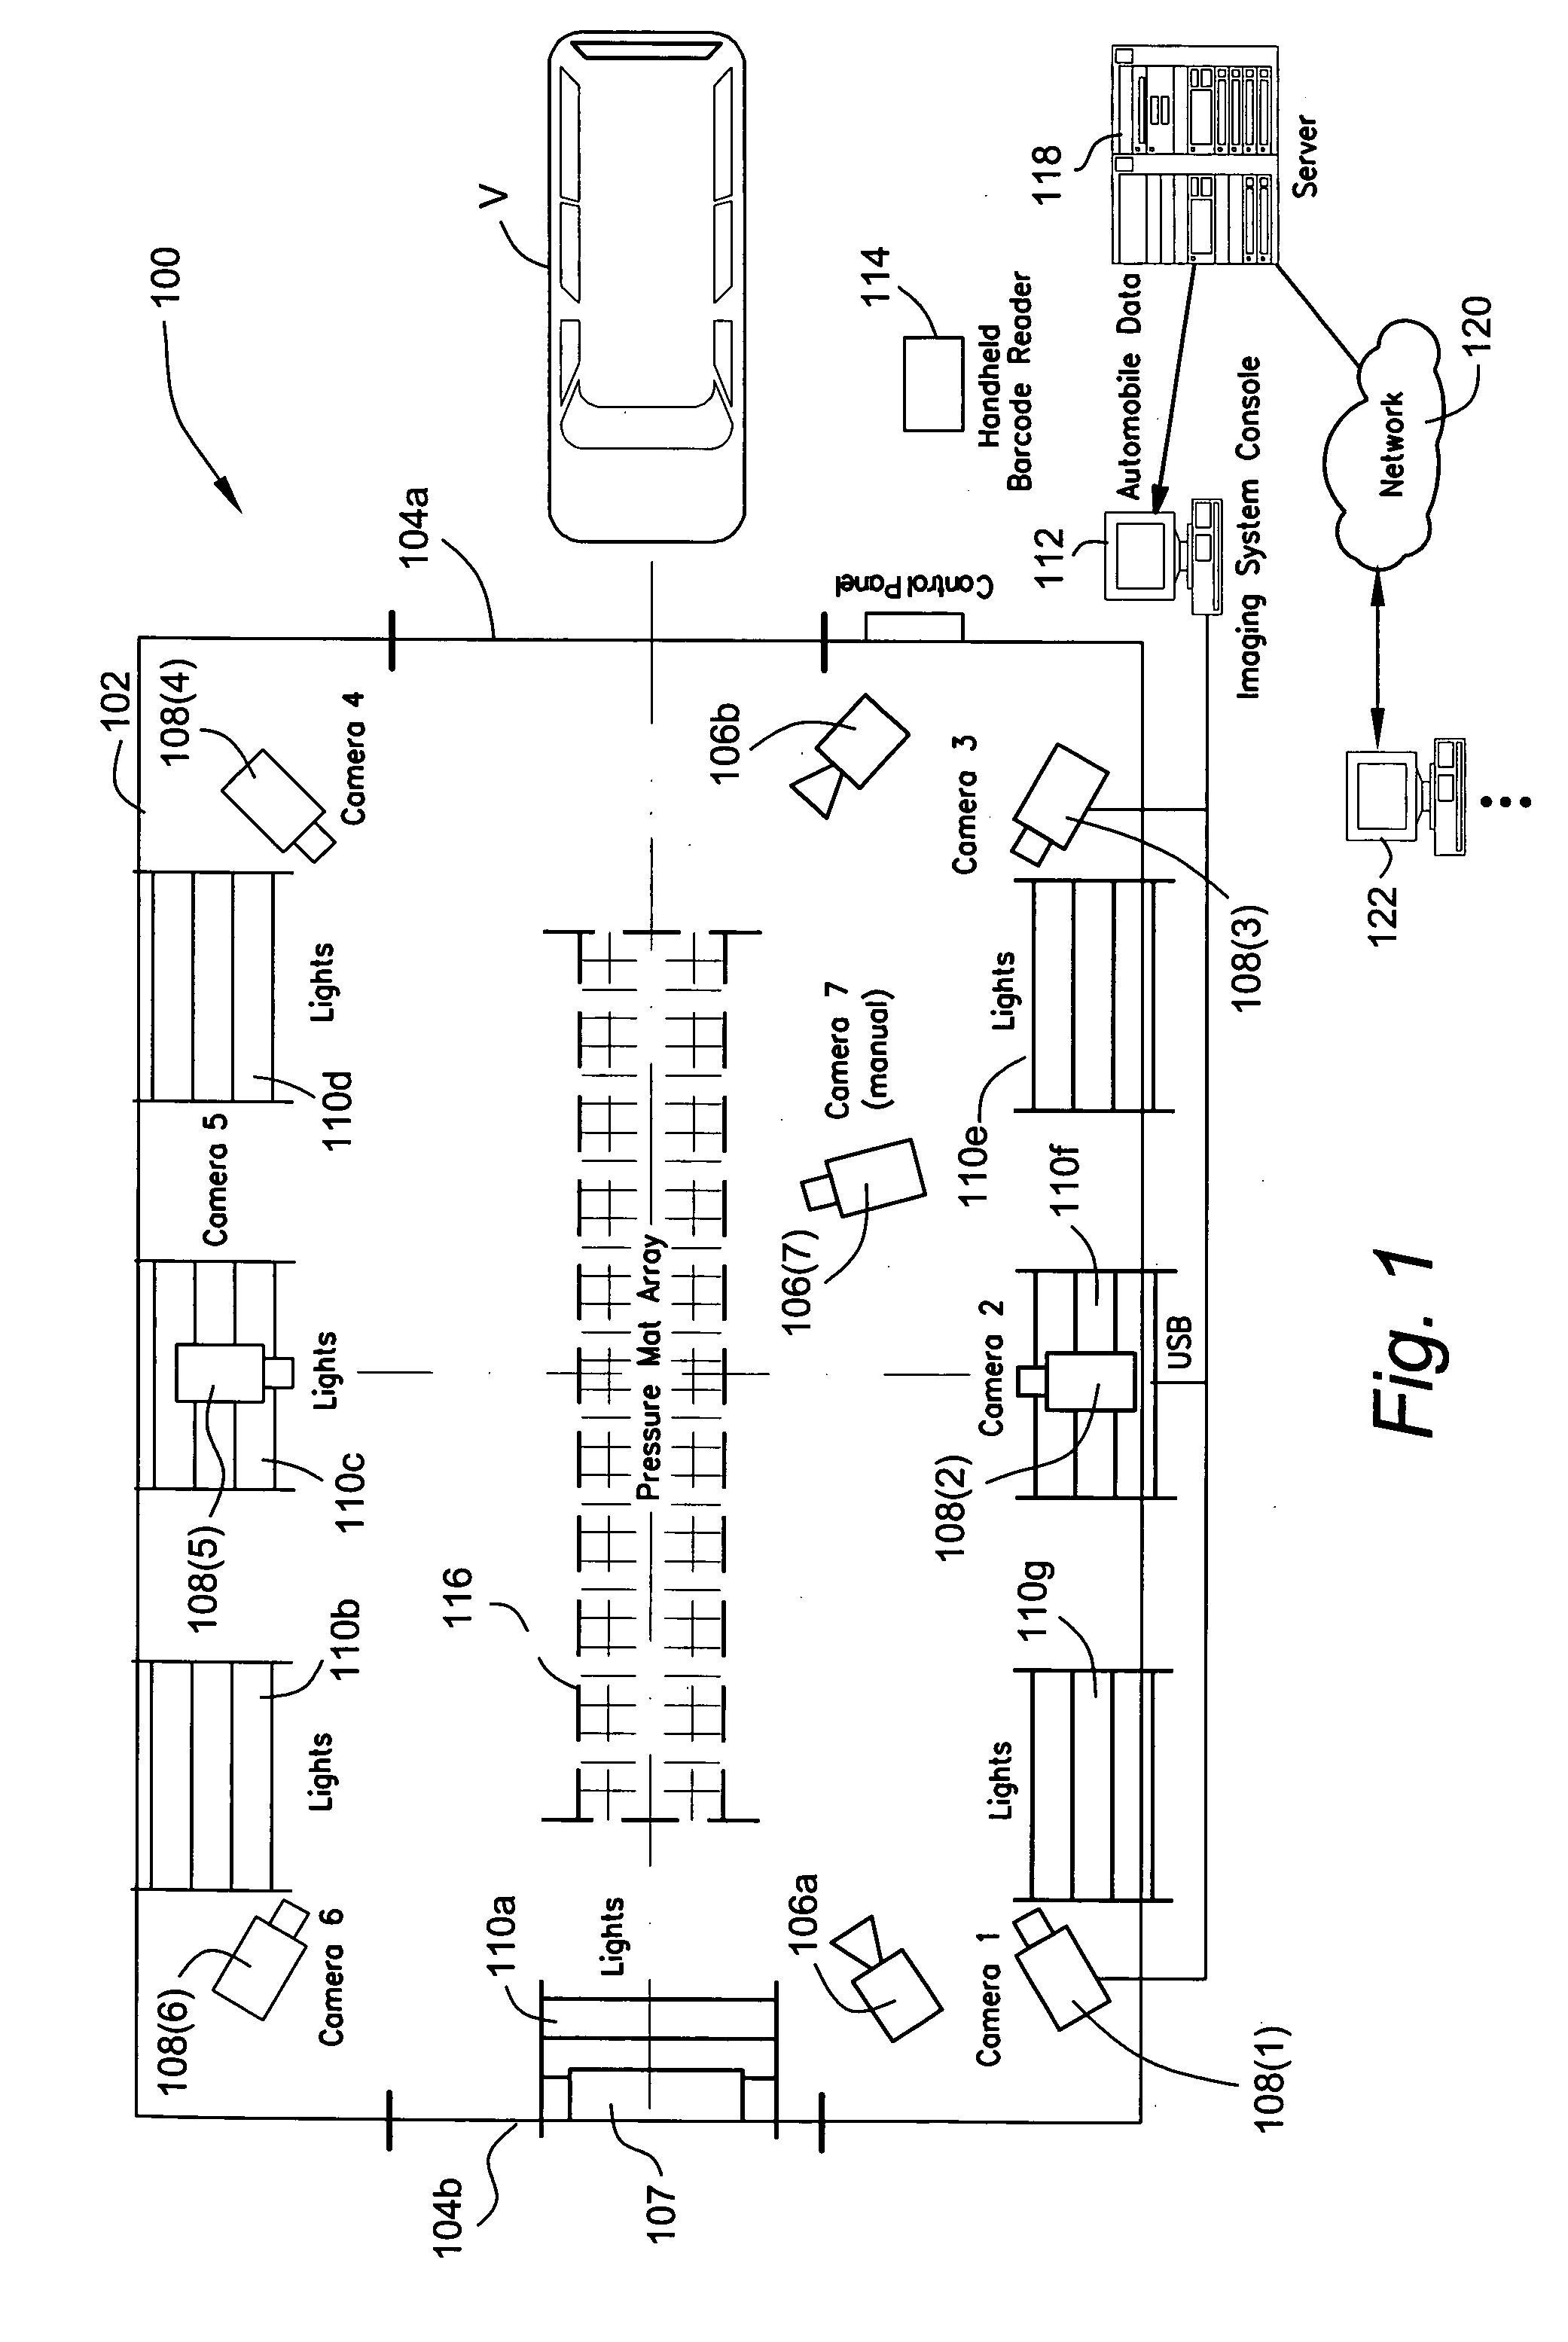 Method and apparatus for automatically capturing multiple images of motor vehicles and other items for sale or auction